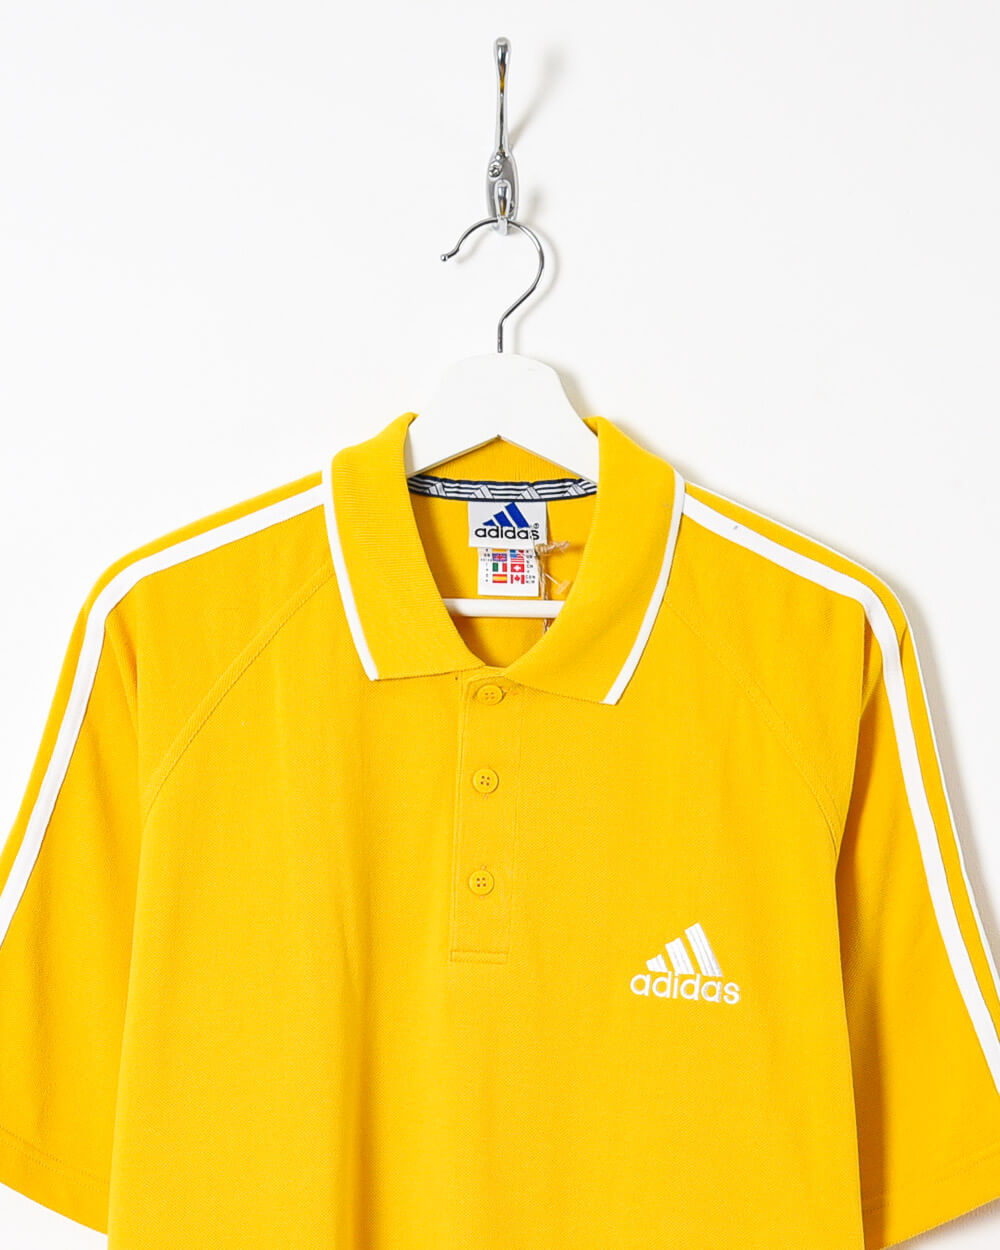 Adidas Polo Shirt - Large - Domno Vintage 90s, 80s, 00s Retro and Vintage Clothing 